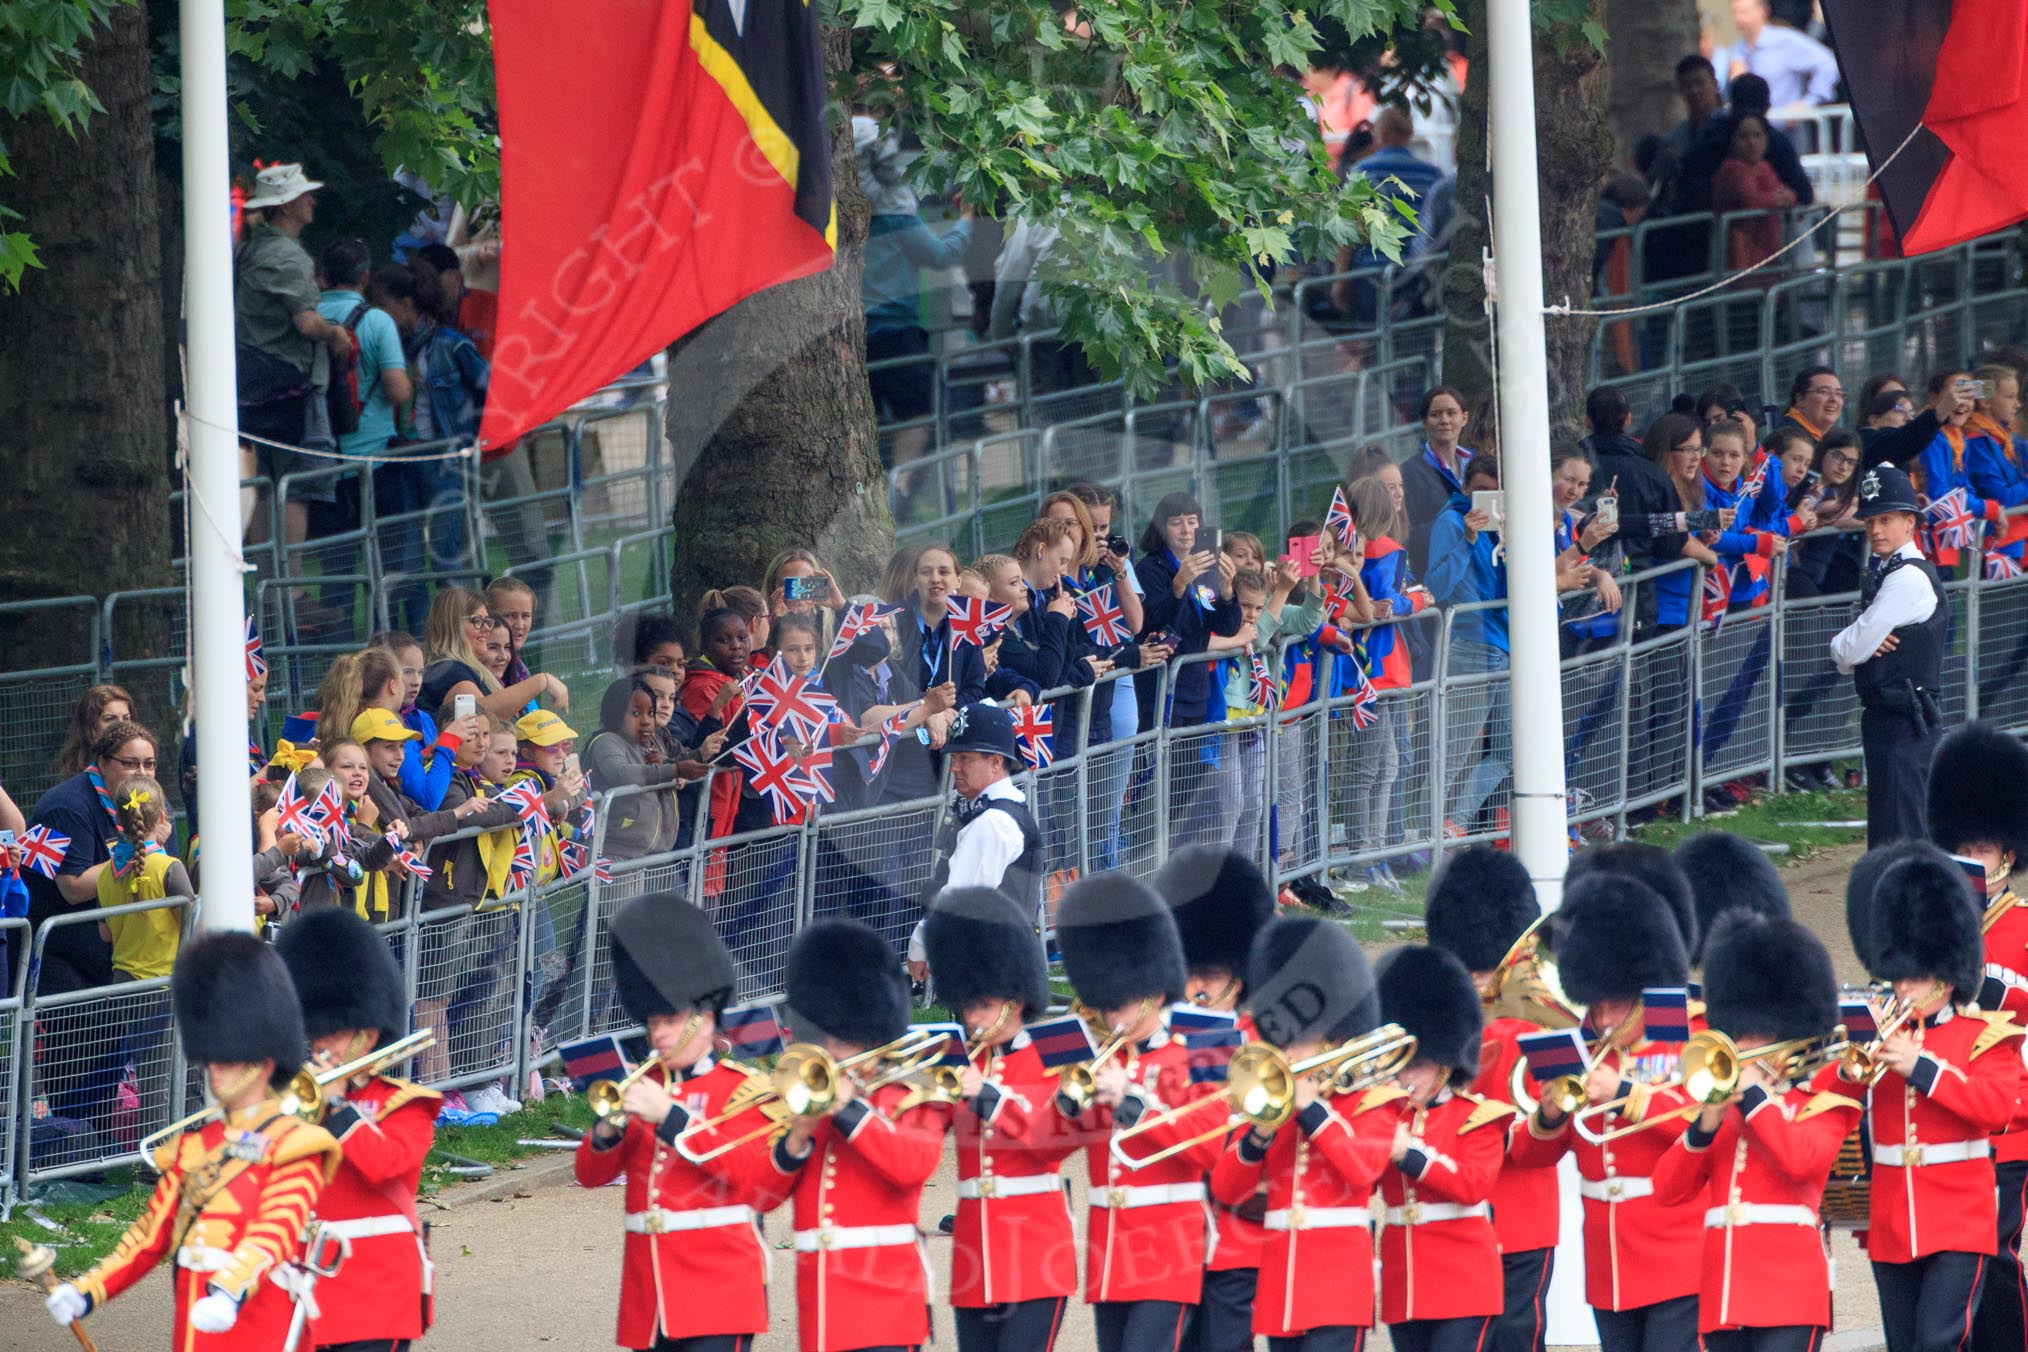 during The Colonel's Review {iptcyear4} (final rehearsal for Trooping the Colour, The Queen's Birthday Parade)  at Horse Guards Parade, Westminster, London, 2 June 2018, 10:15.